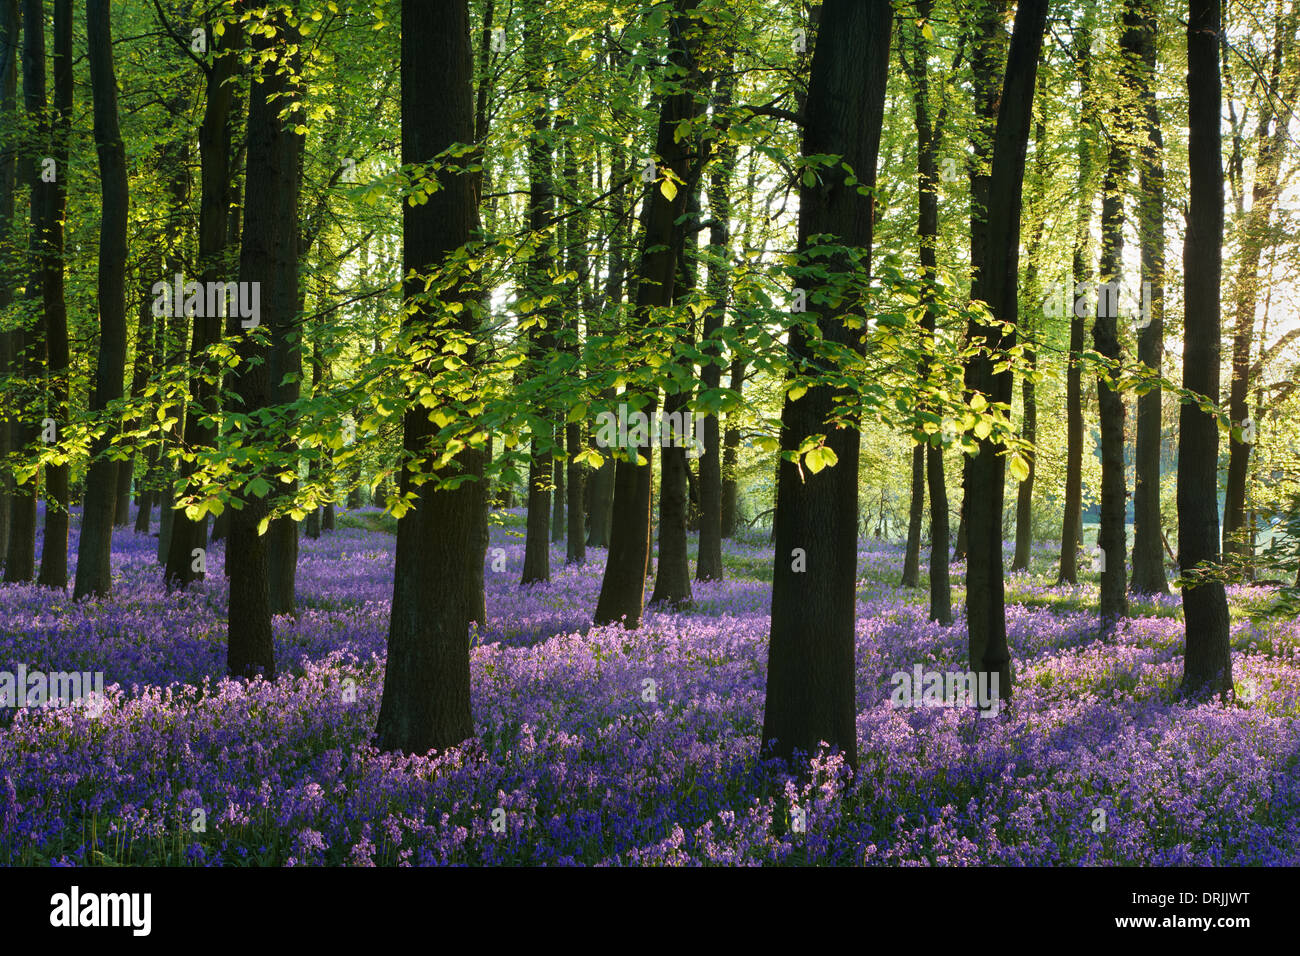 A covering of English bluebells highlighted by early sunlight. A misty sea of blue carpets the woodland floor during spring. Stock Photo